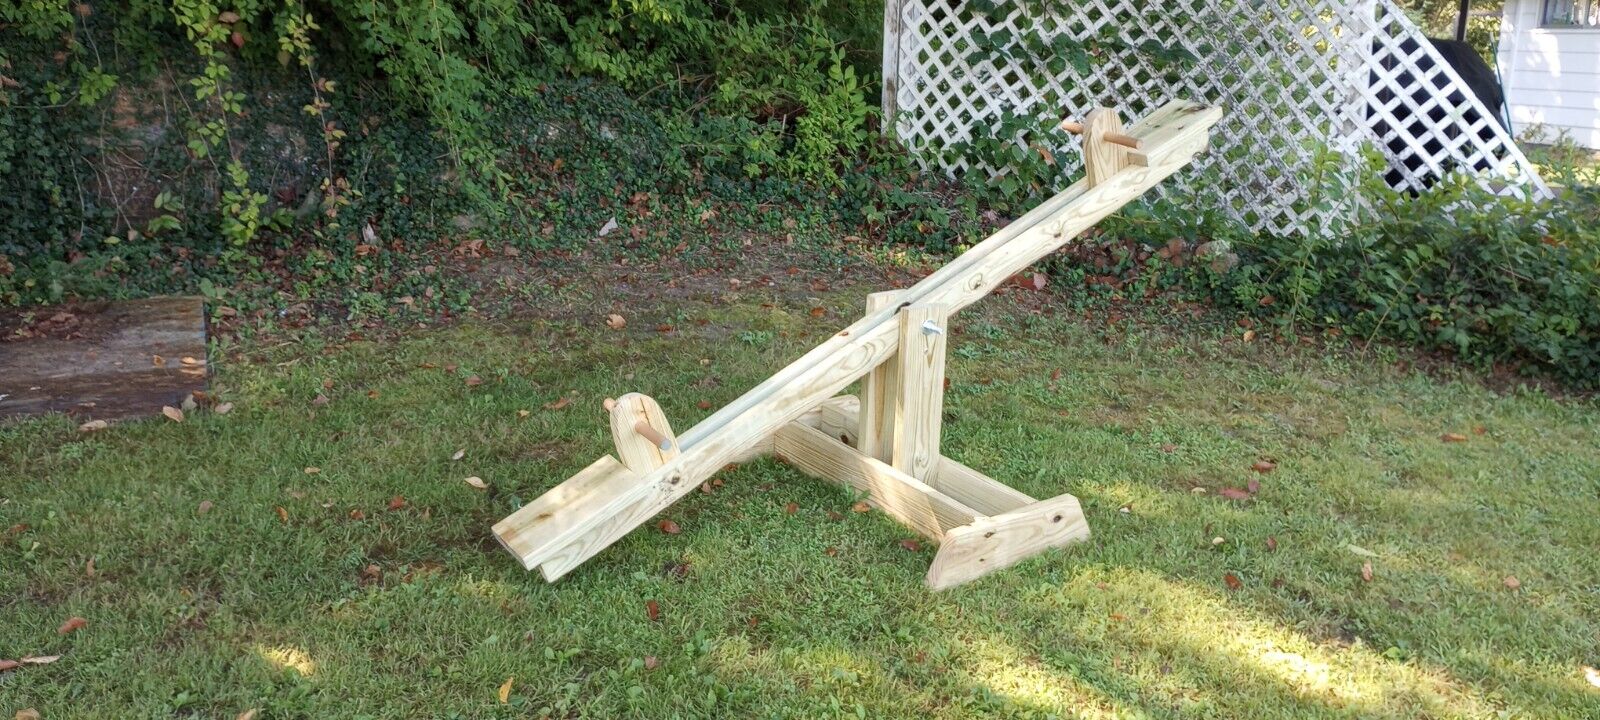 Home Made Modern Childrens Teeter Totter